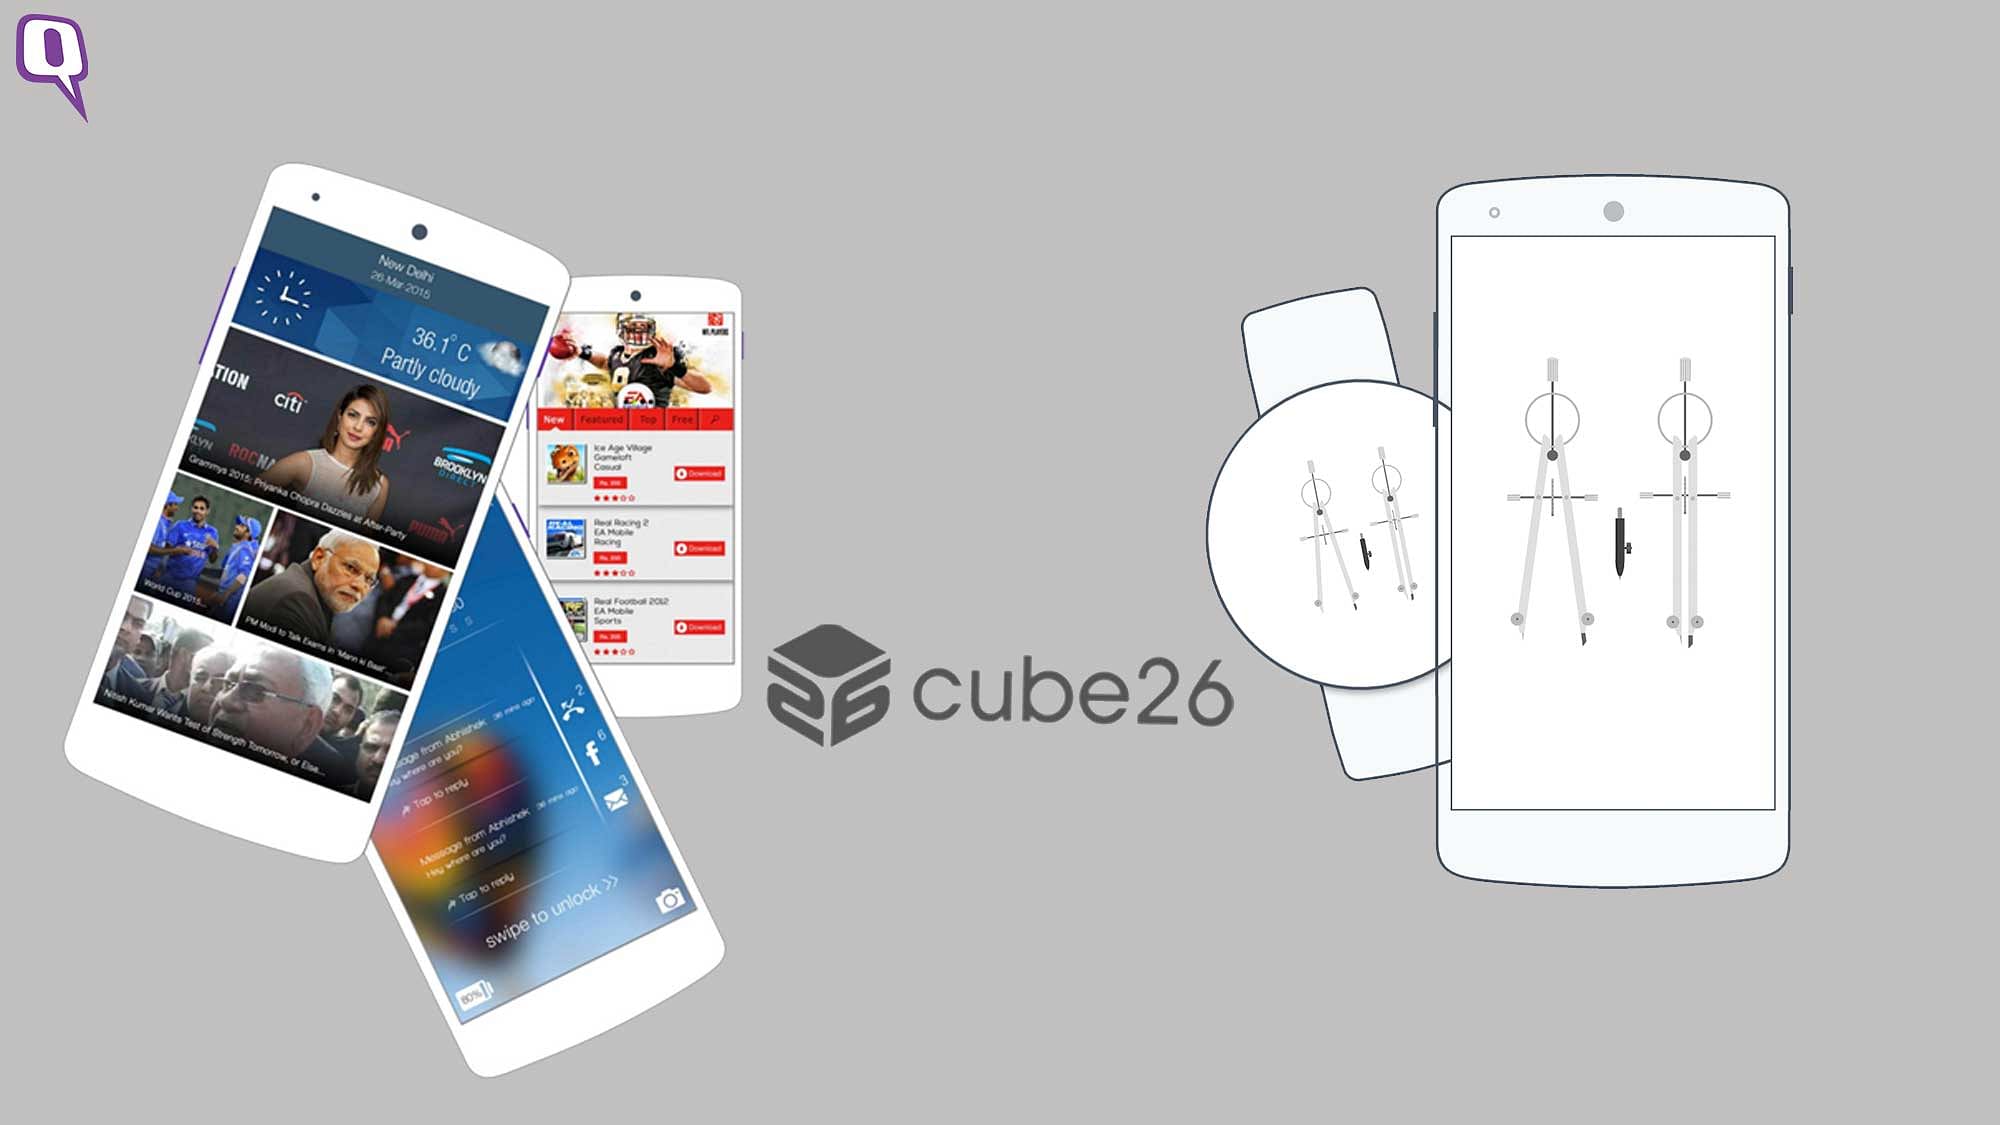 Cube 26 is an India based technology innovation firm focussed on revolutionising the user experience across multiple devices and platforms. (Photo Courtesy:<a href="http://cube26.com/"> Cube26</a>)